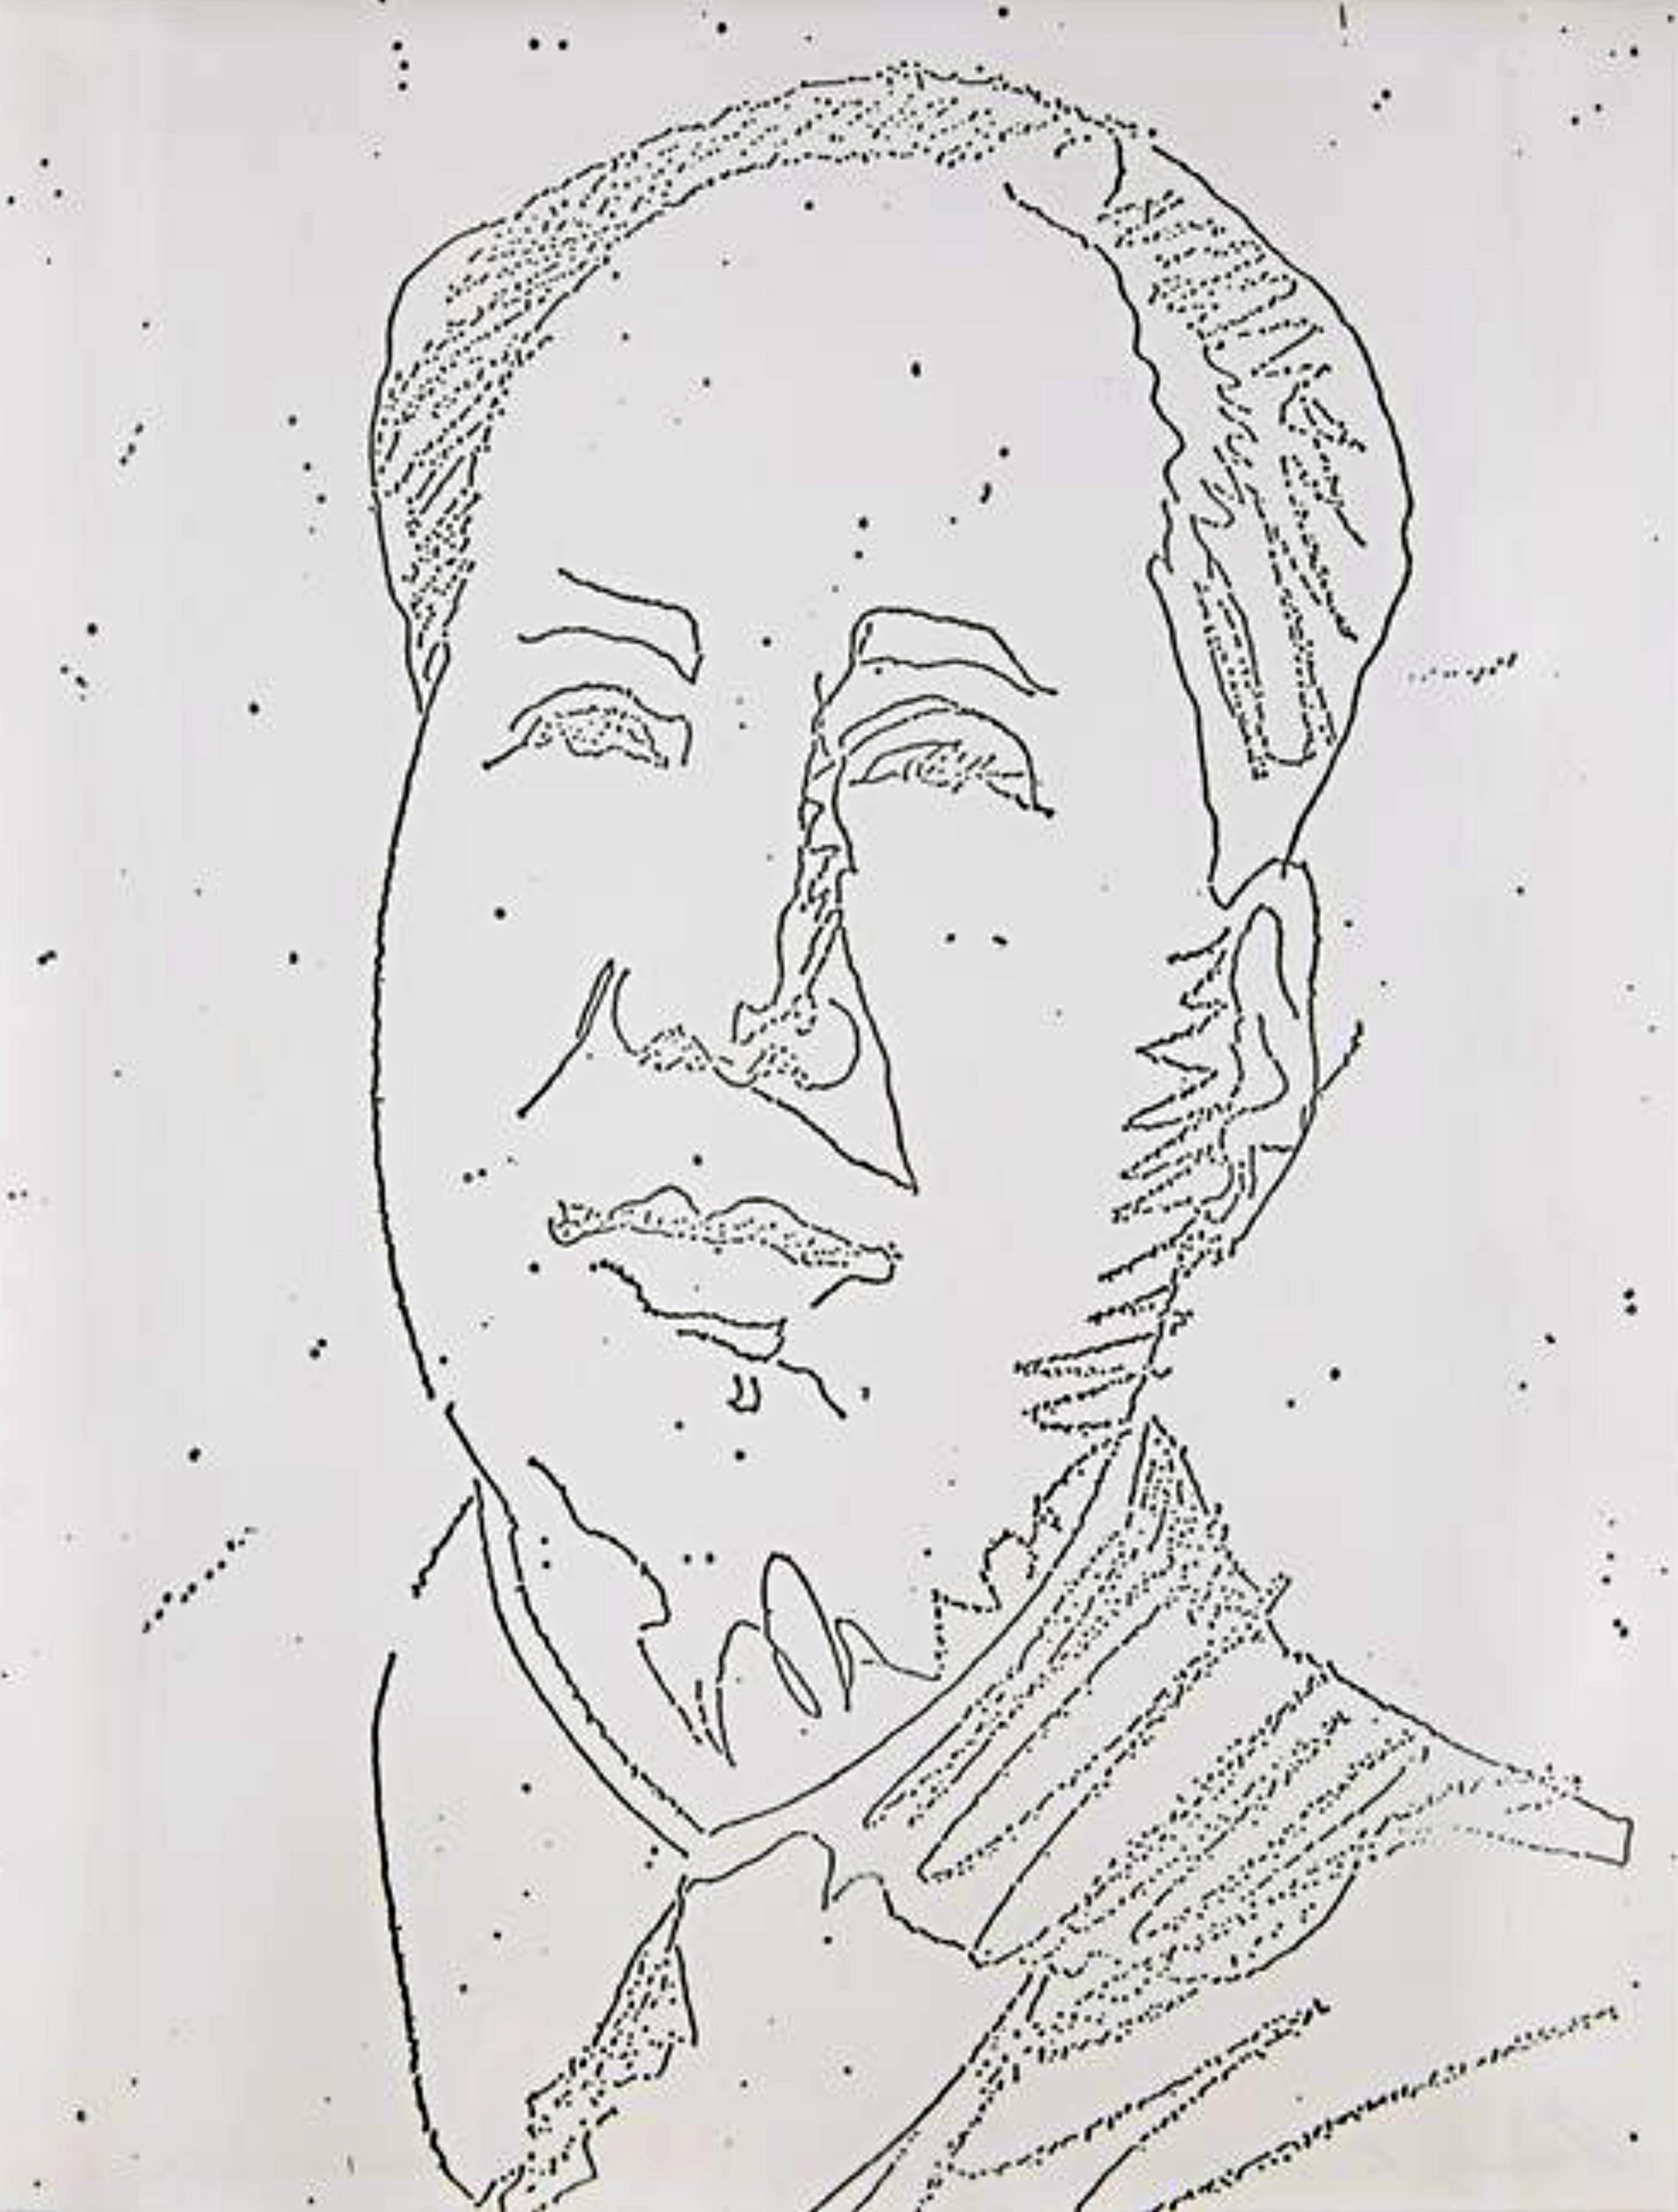 Andy Warhol Portrait Print - Mao from New York Collection for Stockholm (F&S II. 89), Lt Ed Unique variation 